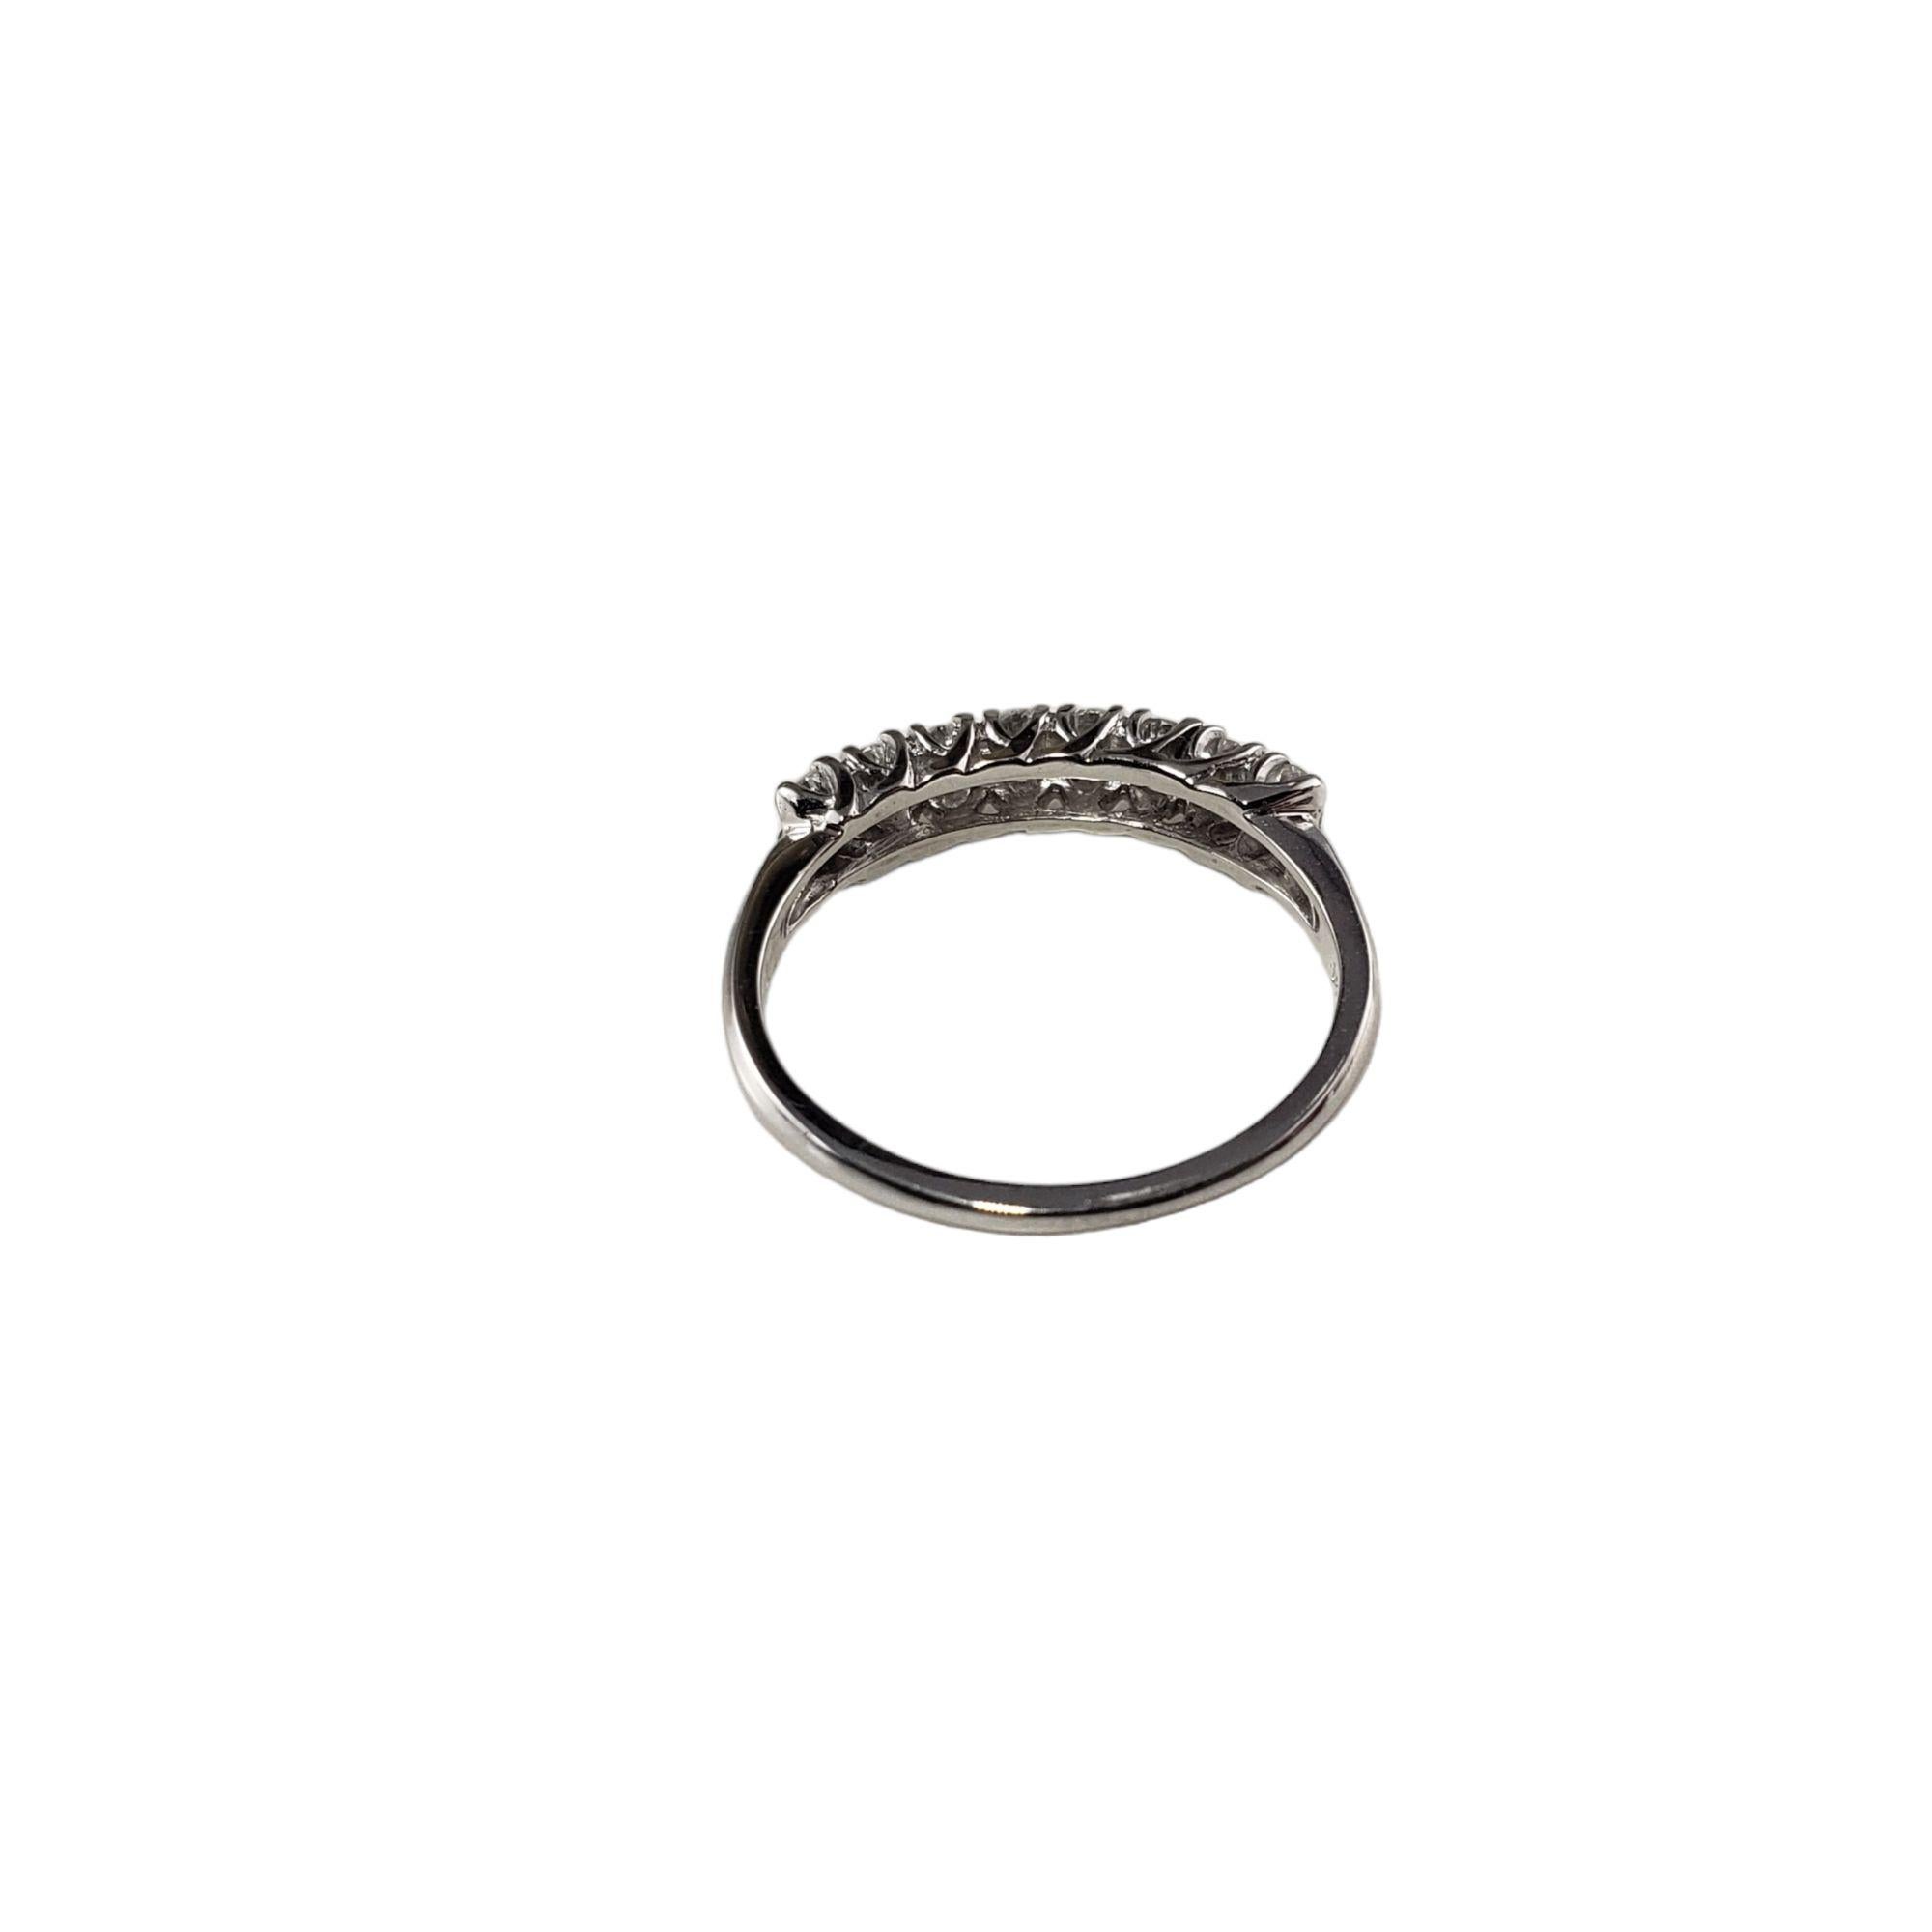 Vintage 14 Karat White Gold and Diamond Wedding Band Ring Size 6.25-6.5

This sparkling band features eight round brilliant cut diamonds set in classic 14K white gold. Width: 4 mm. Shank: 2 mm.

Approximate total diamond weight: .40 ct.

Diamond